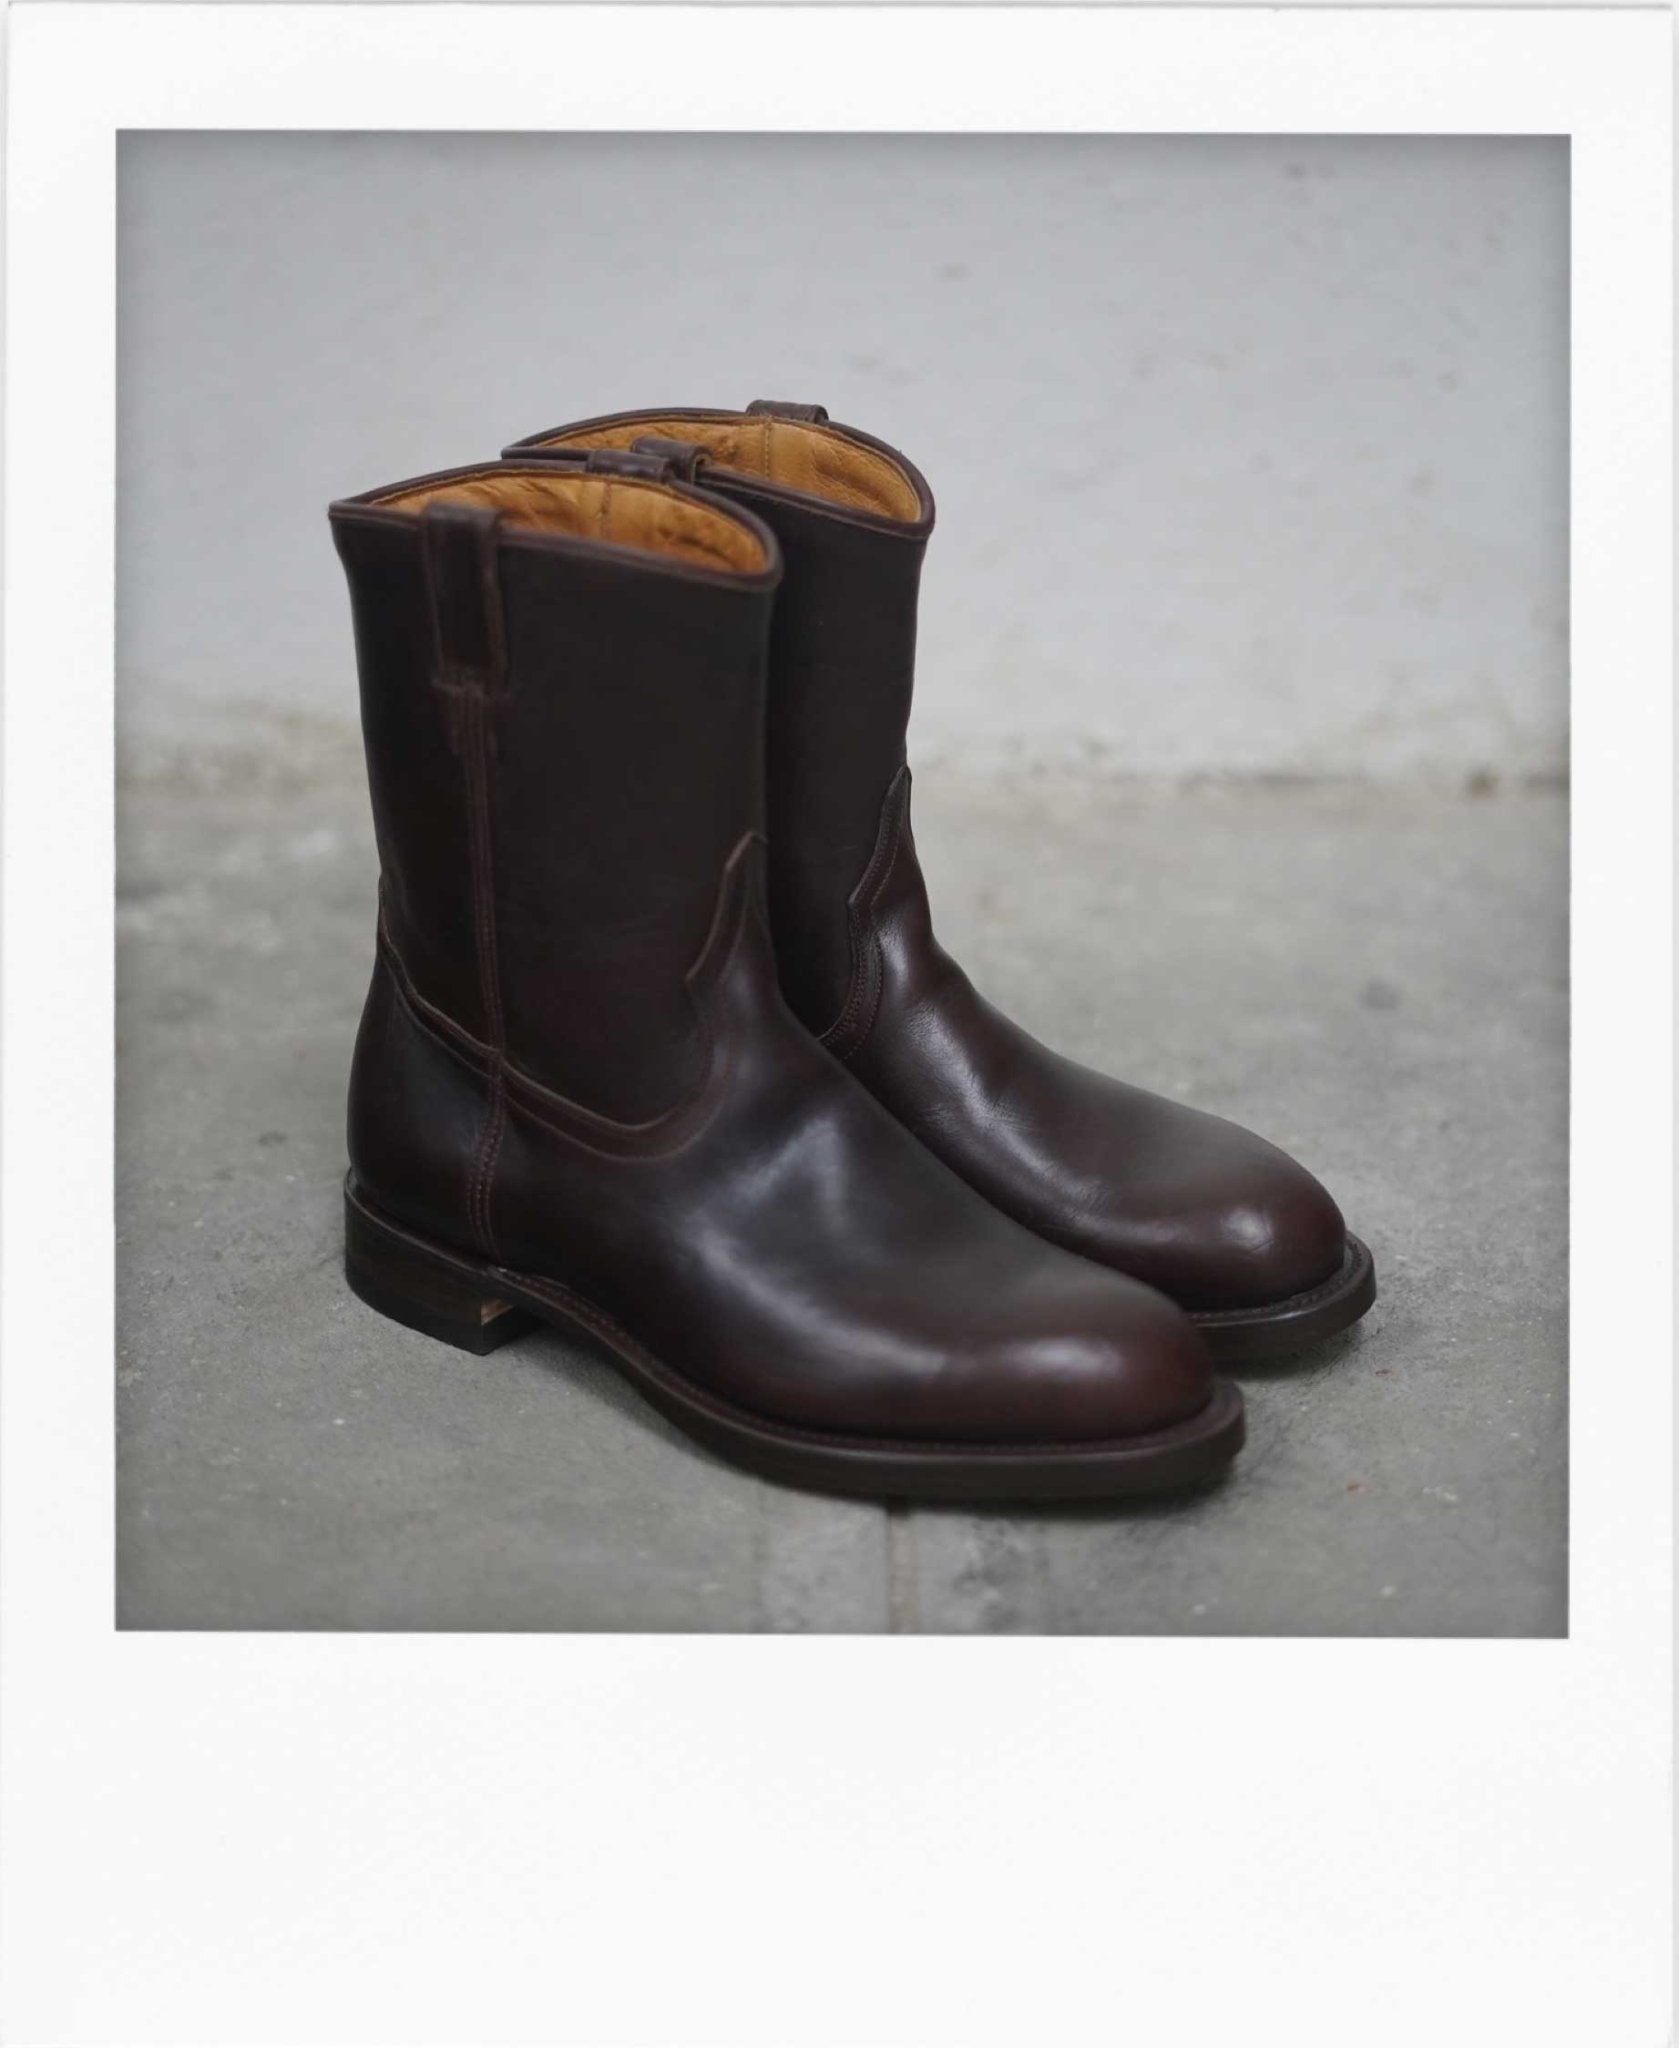 Roper Brown CXL US9 - perfect for everyday wear and fashion